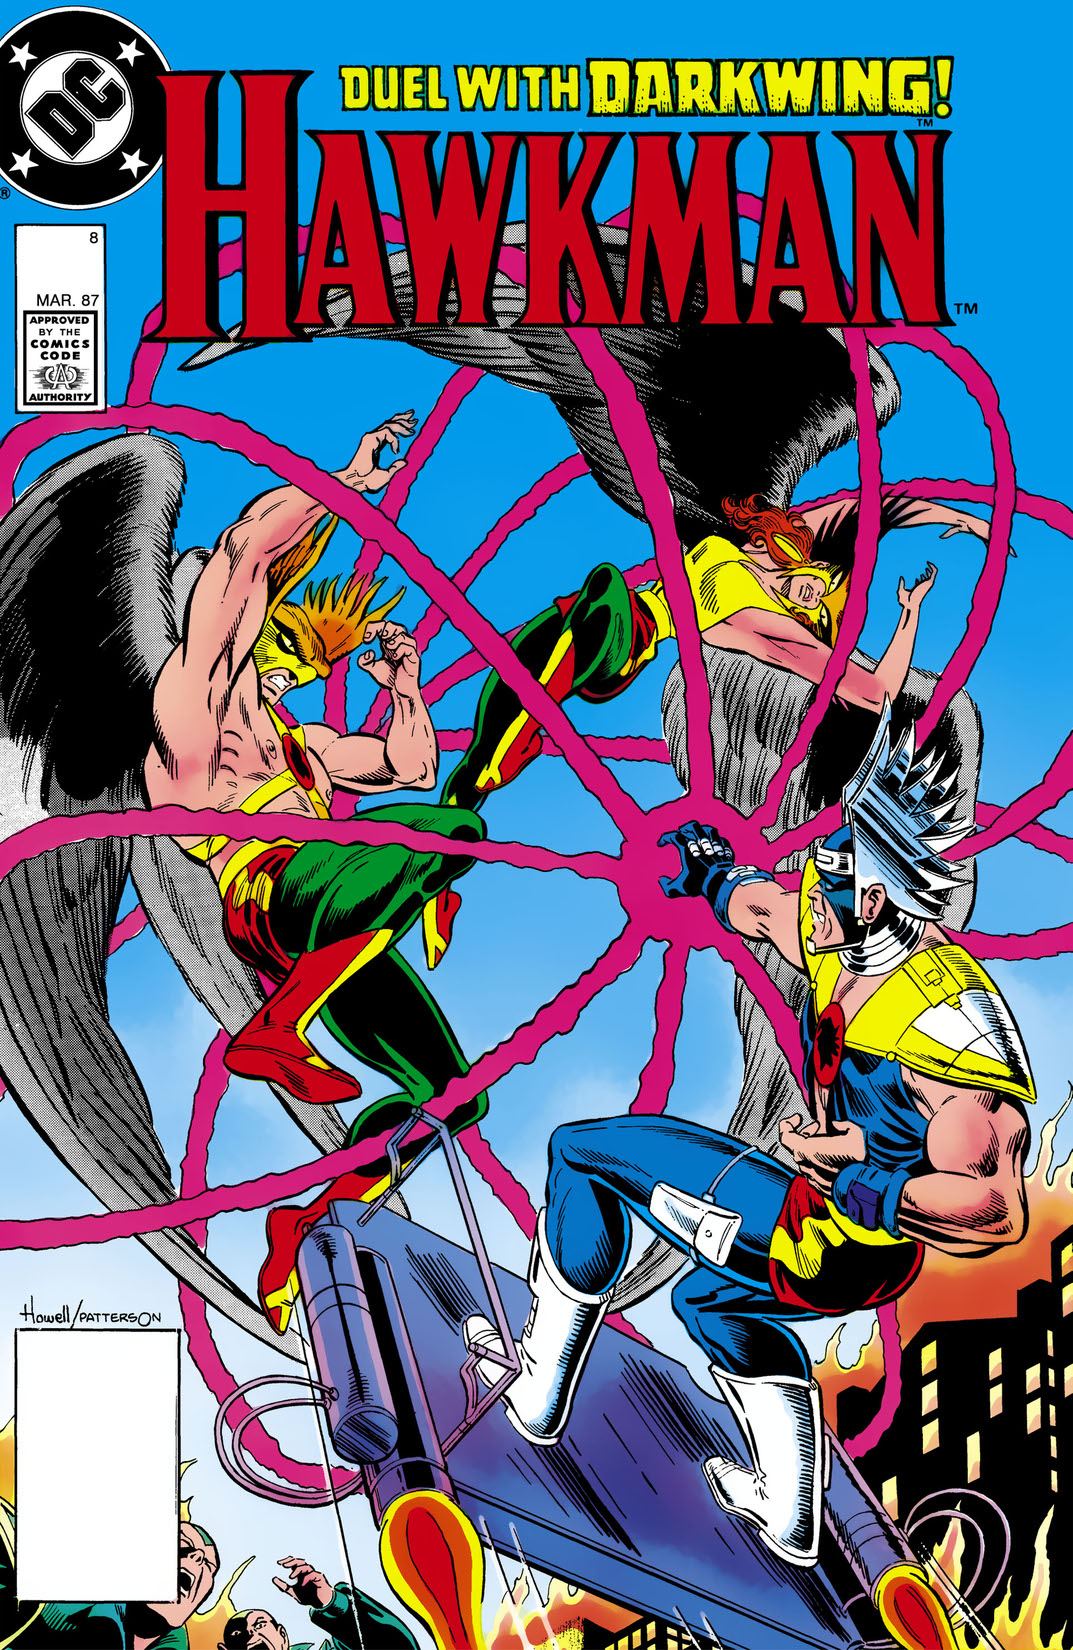 Hawkman (1986-) #8 preview images